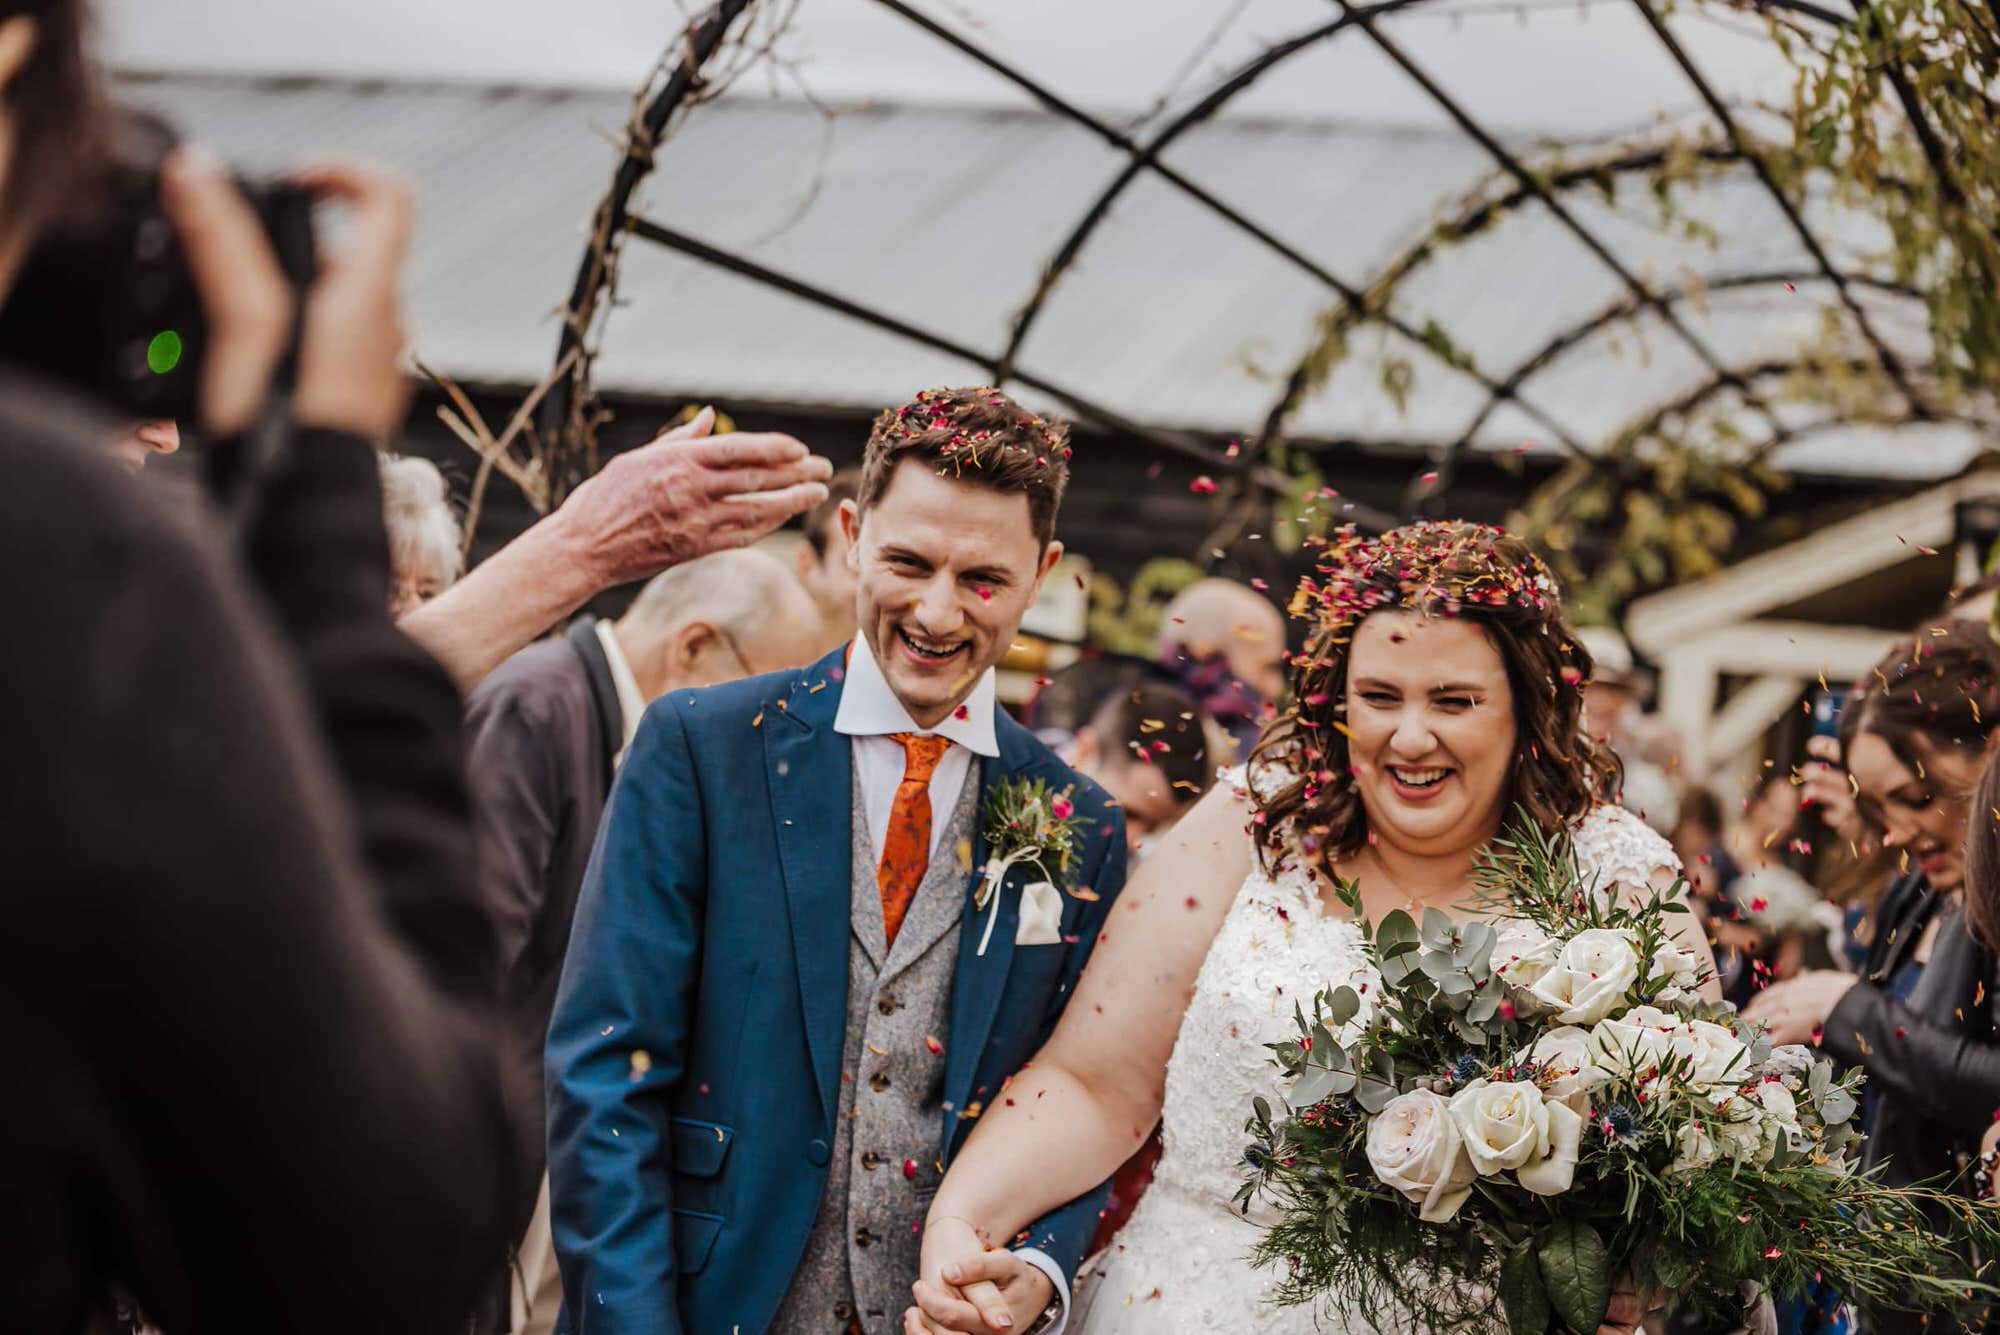 Confetti of Groom and bride after the wedding ceremony Roshni photography The Milling Barn, Bluntswood Hall, Throcking wedding photographer